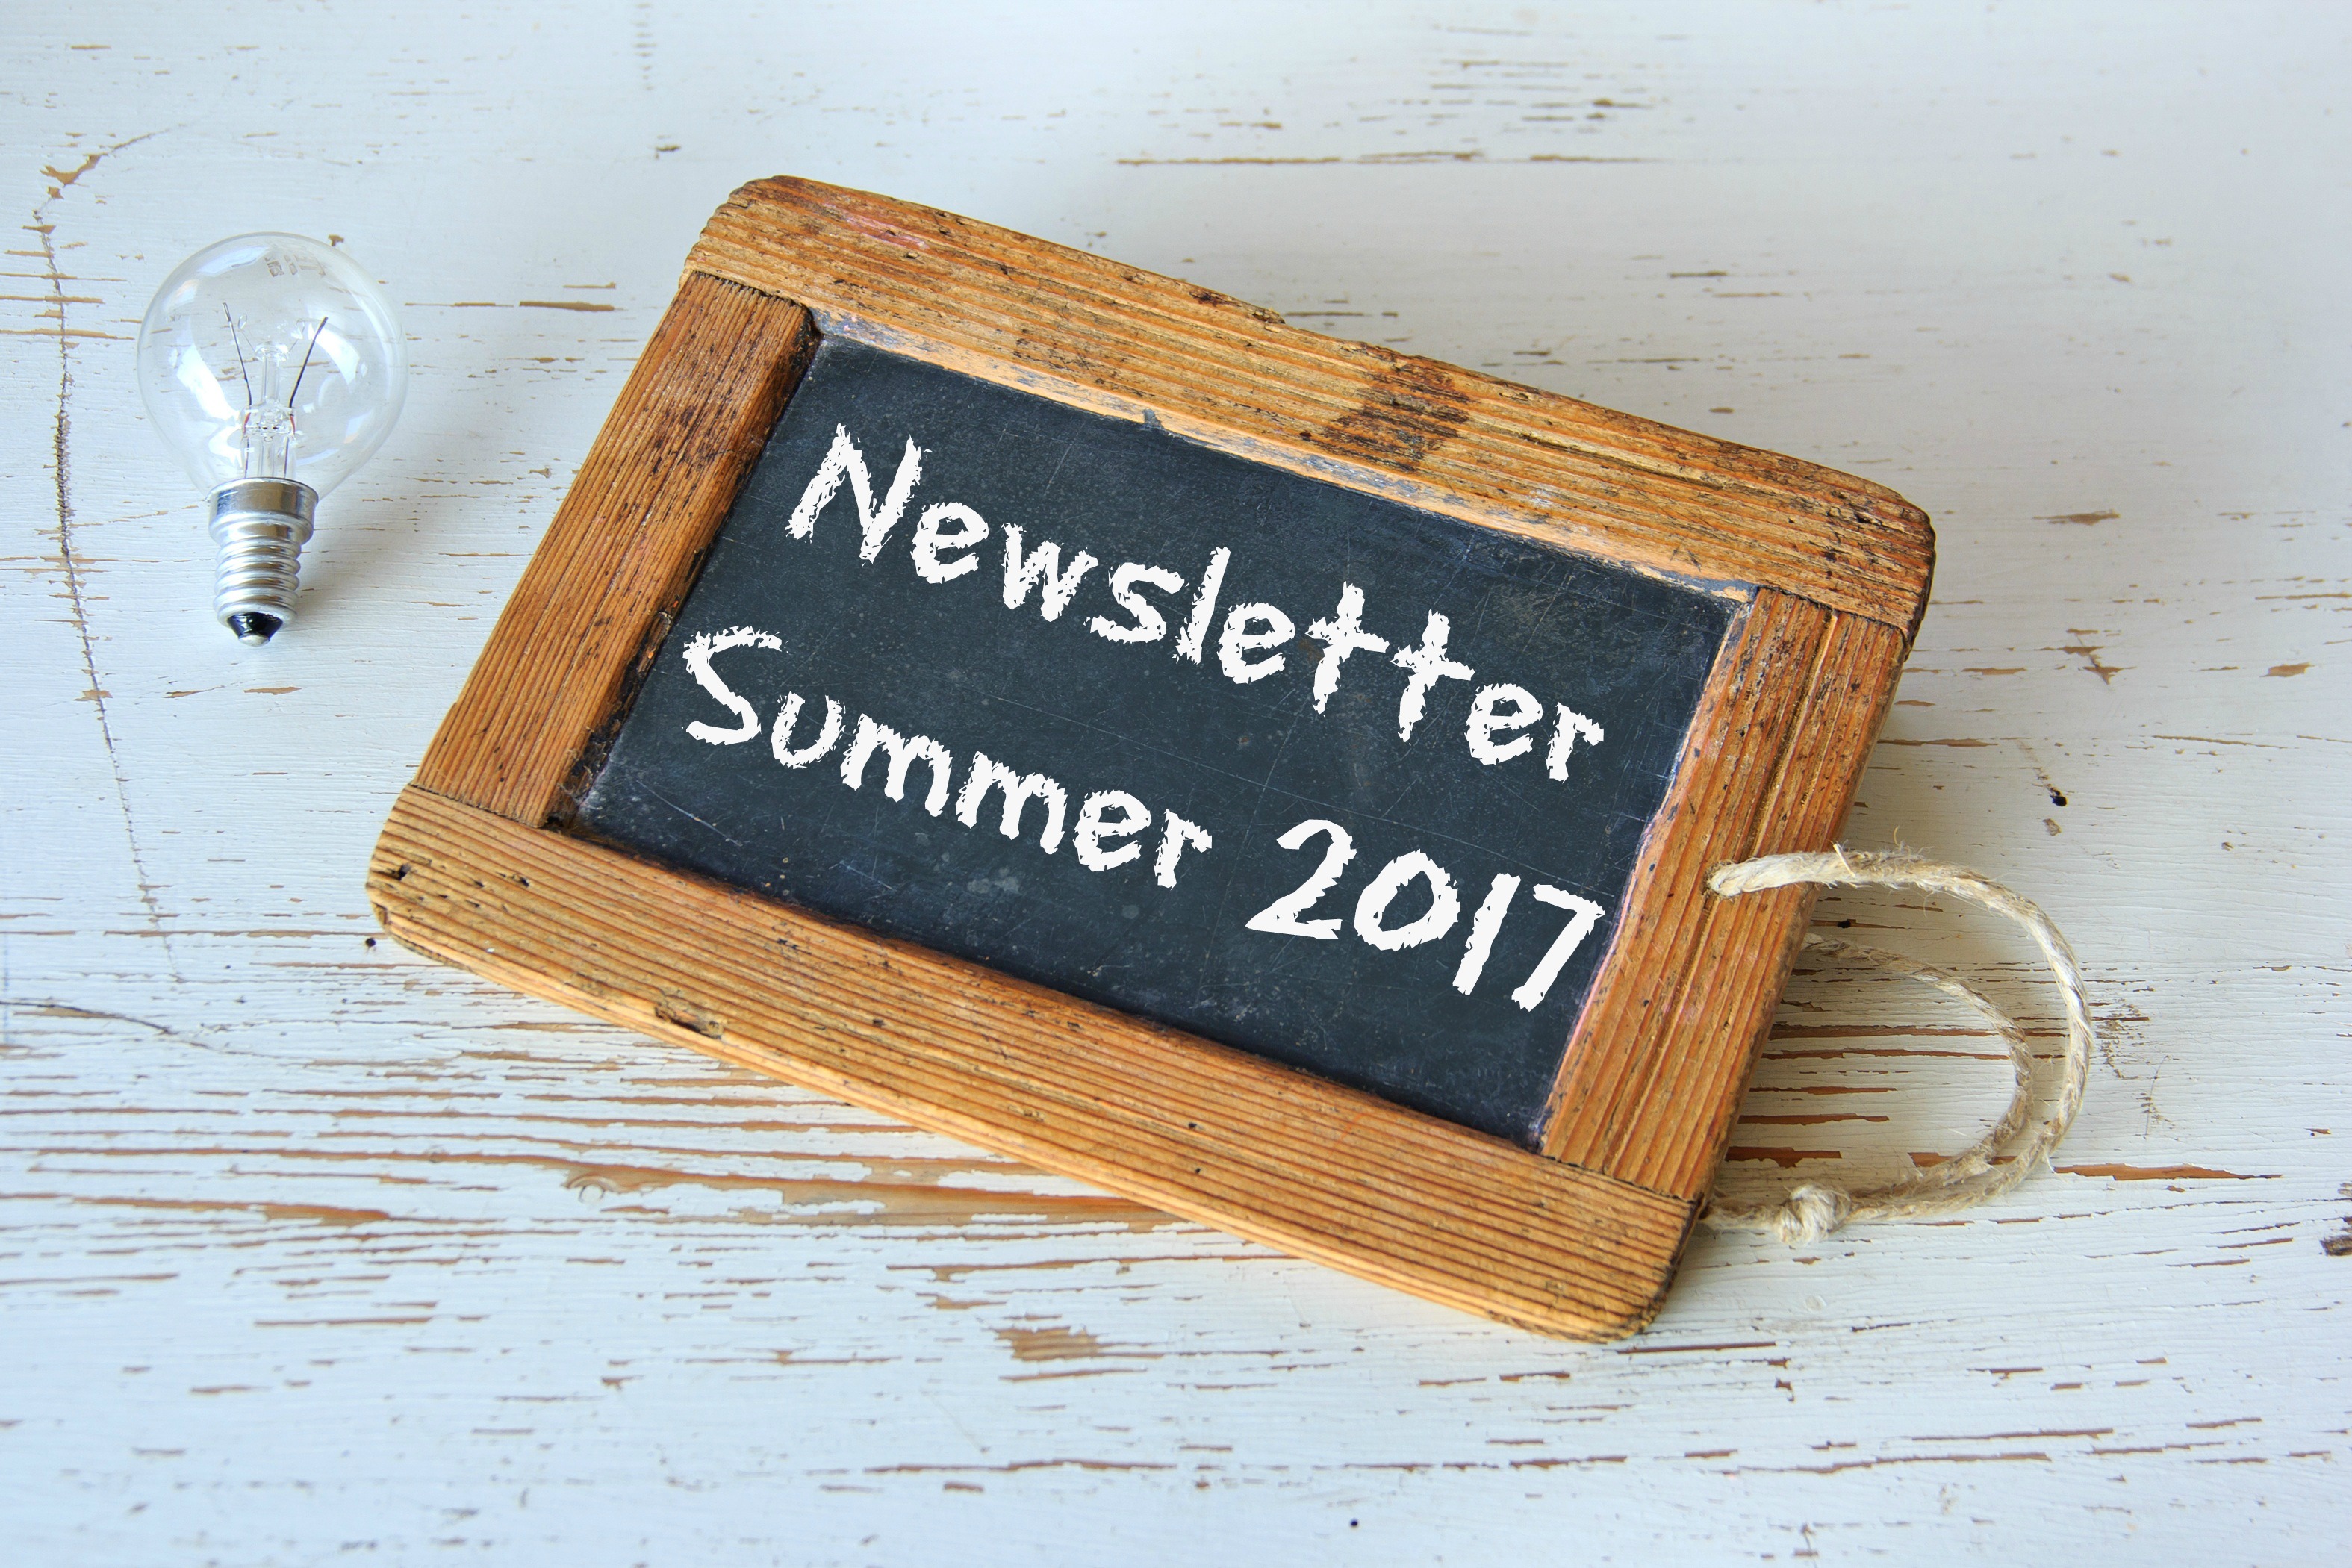 newsletter summer 2017 - Newsletter: Did You Know Charcoal Could Do This?